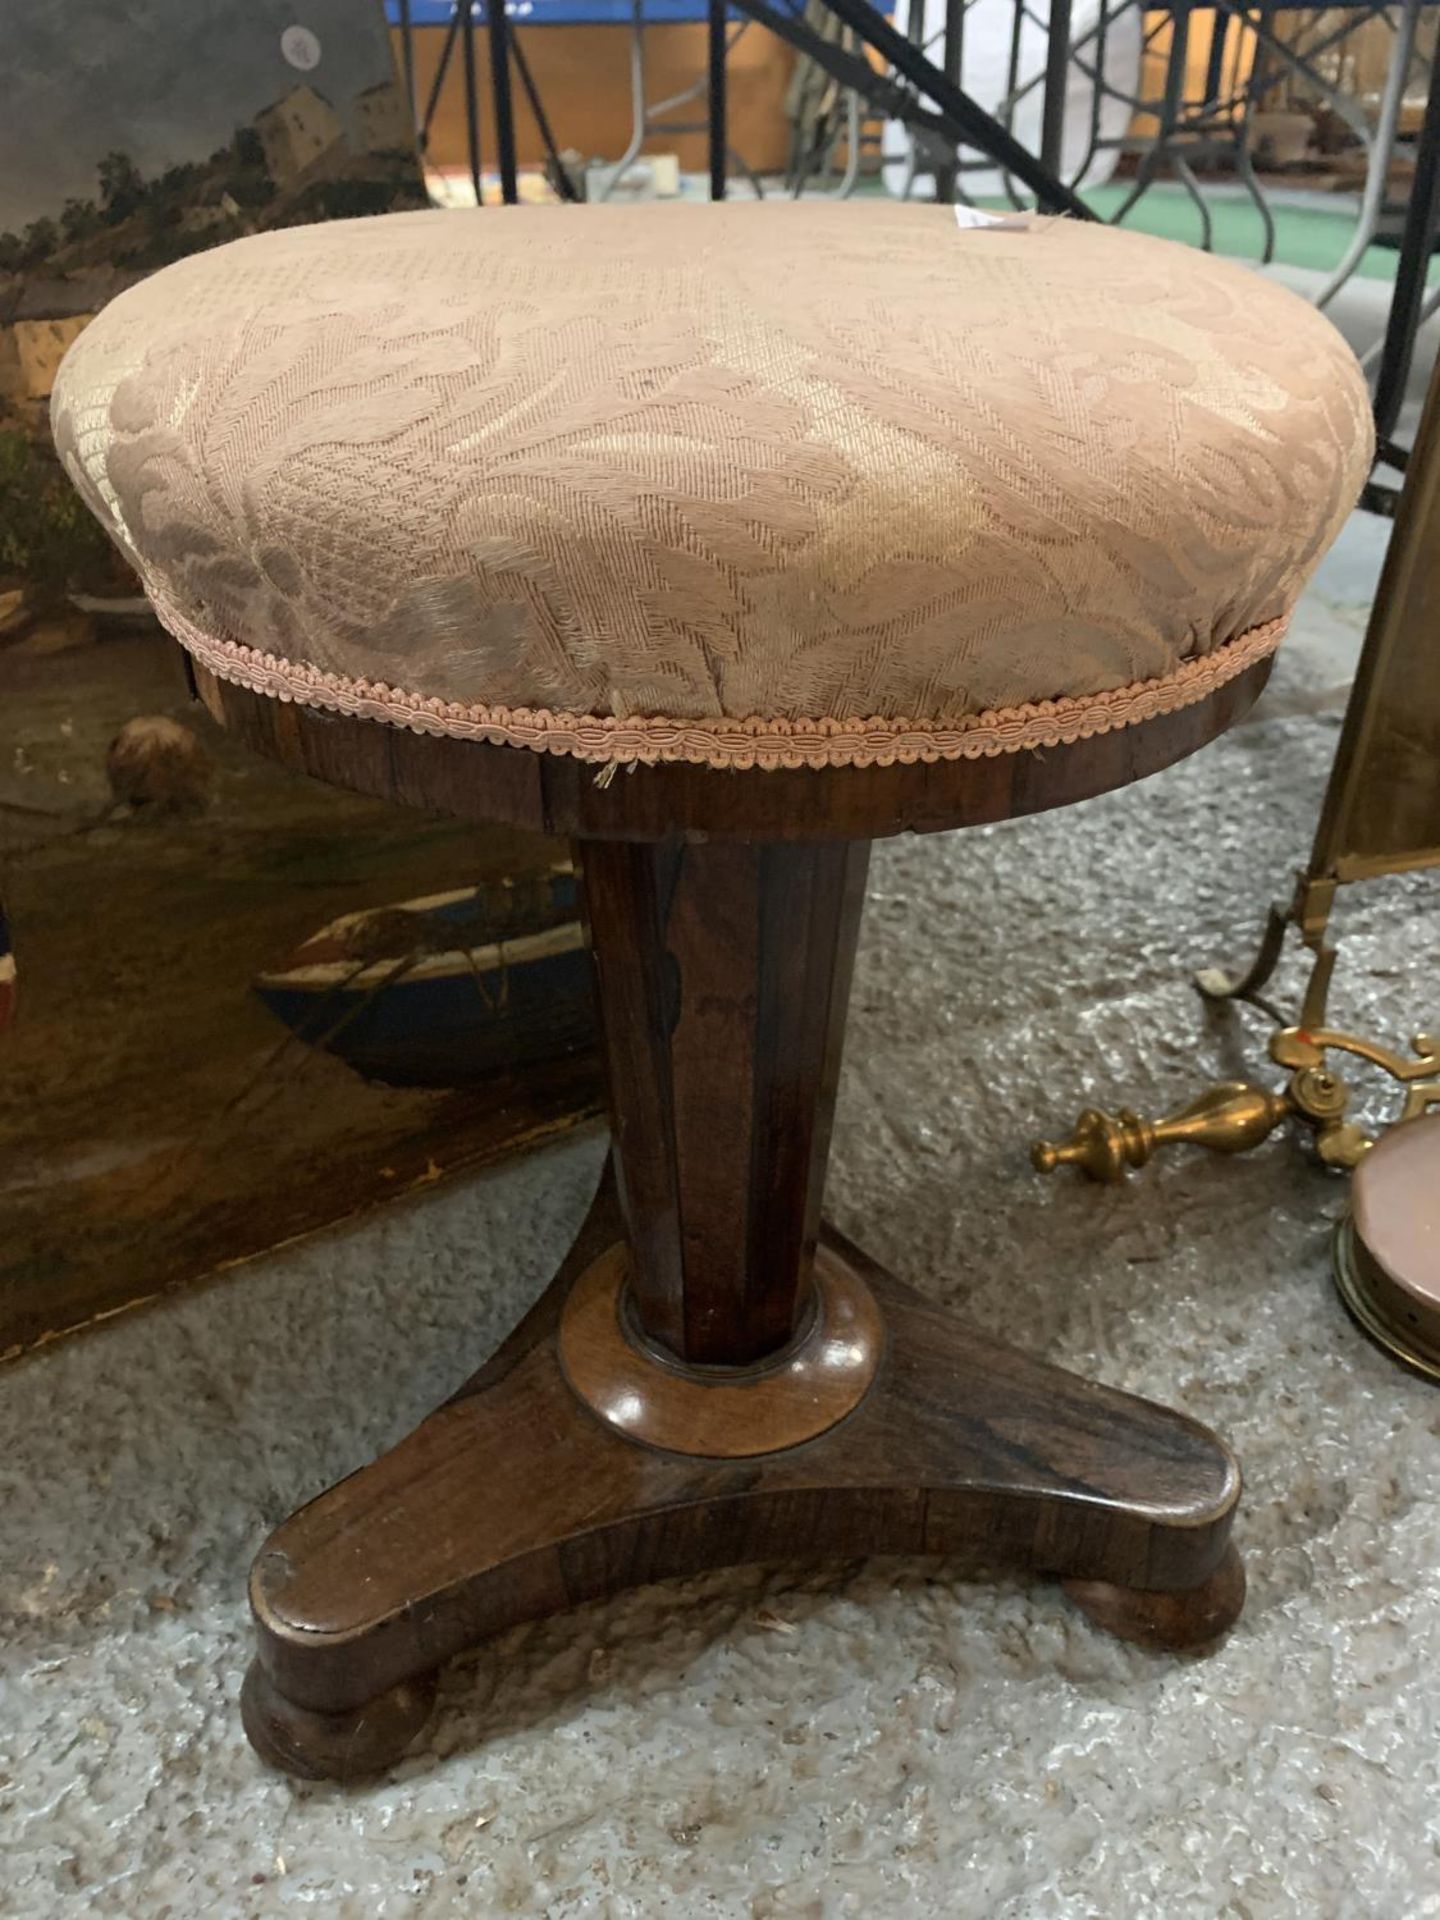 A VICTORIAN WALNUT ROTATING PIANO STOOL WITH AN UPHOLSTERED SEAT - Image 2 of 9